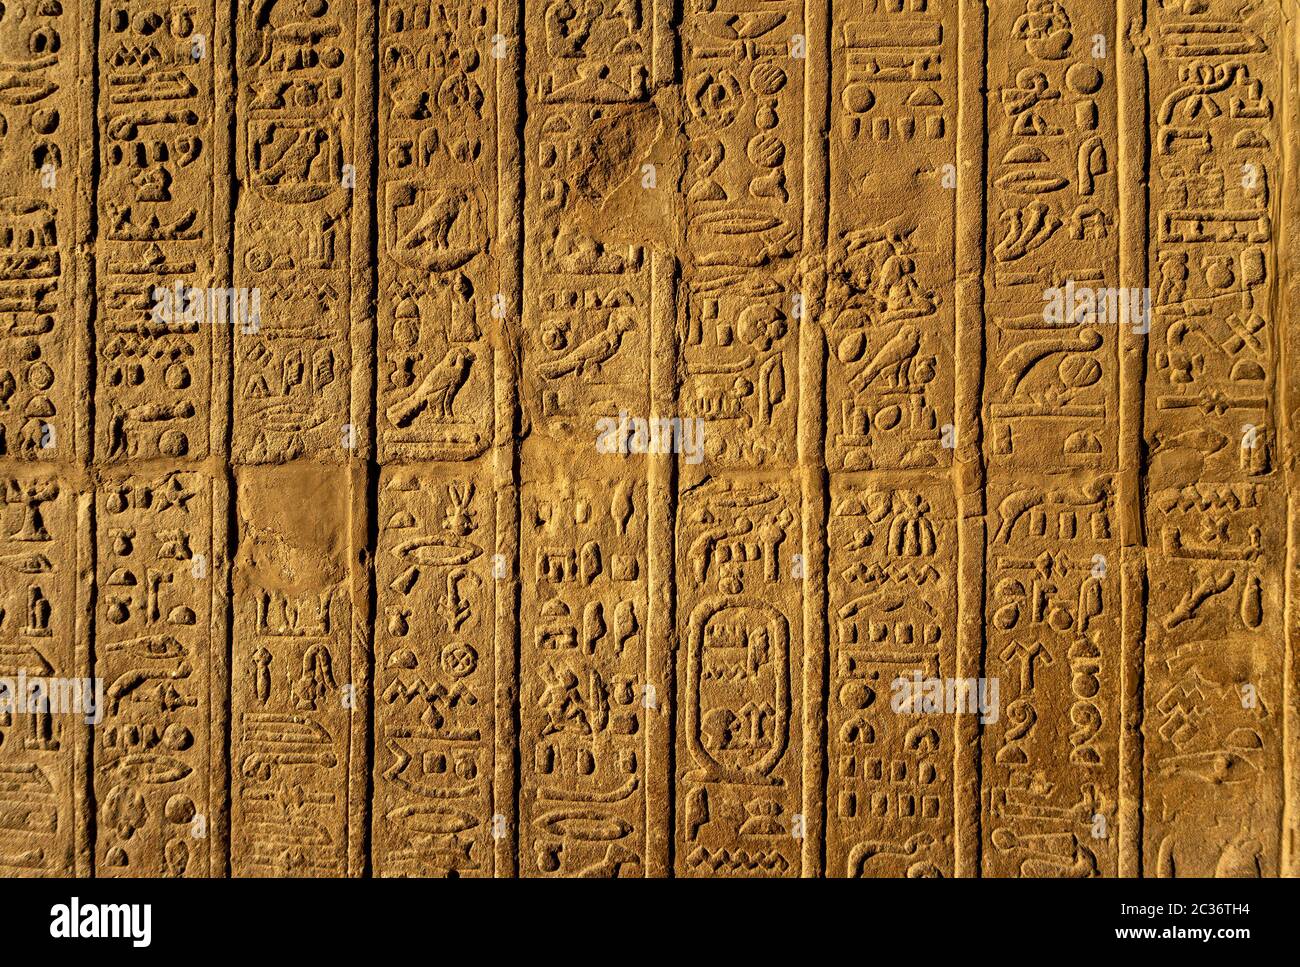 ancient egypt images and hieroglyphics Stock Photo